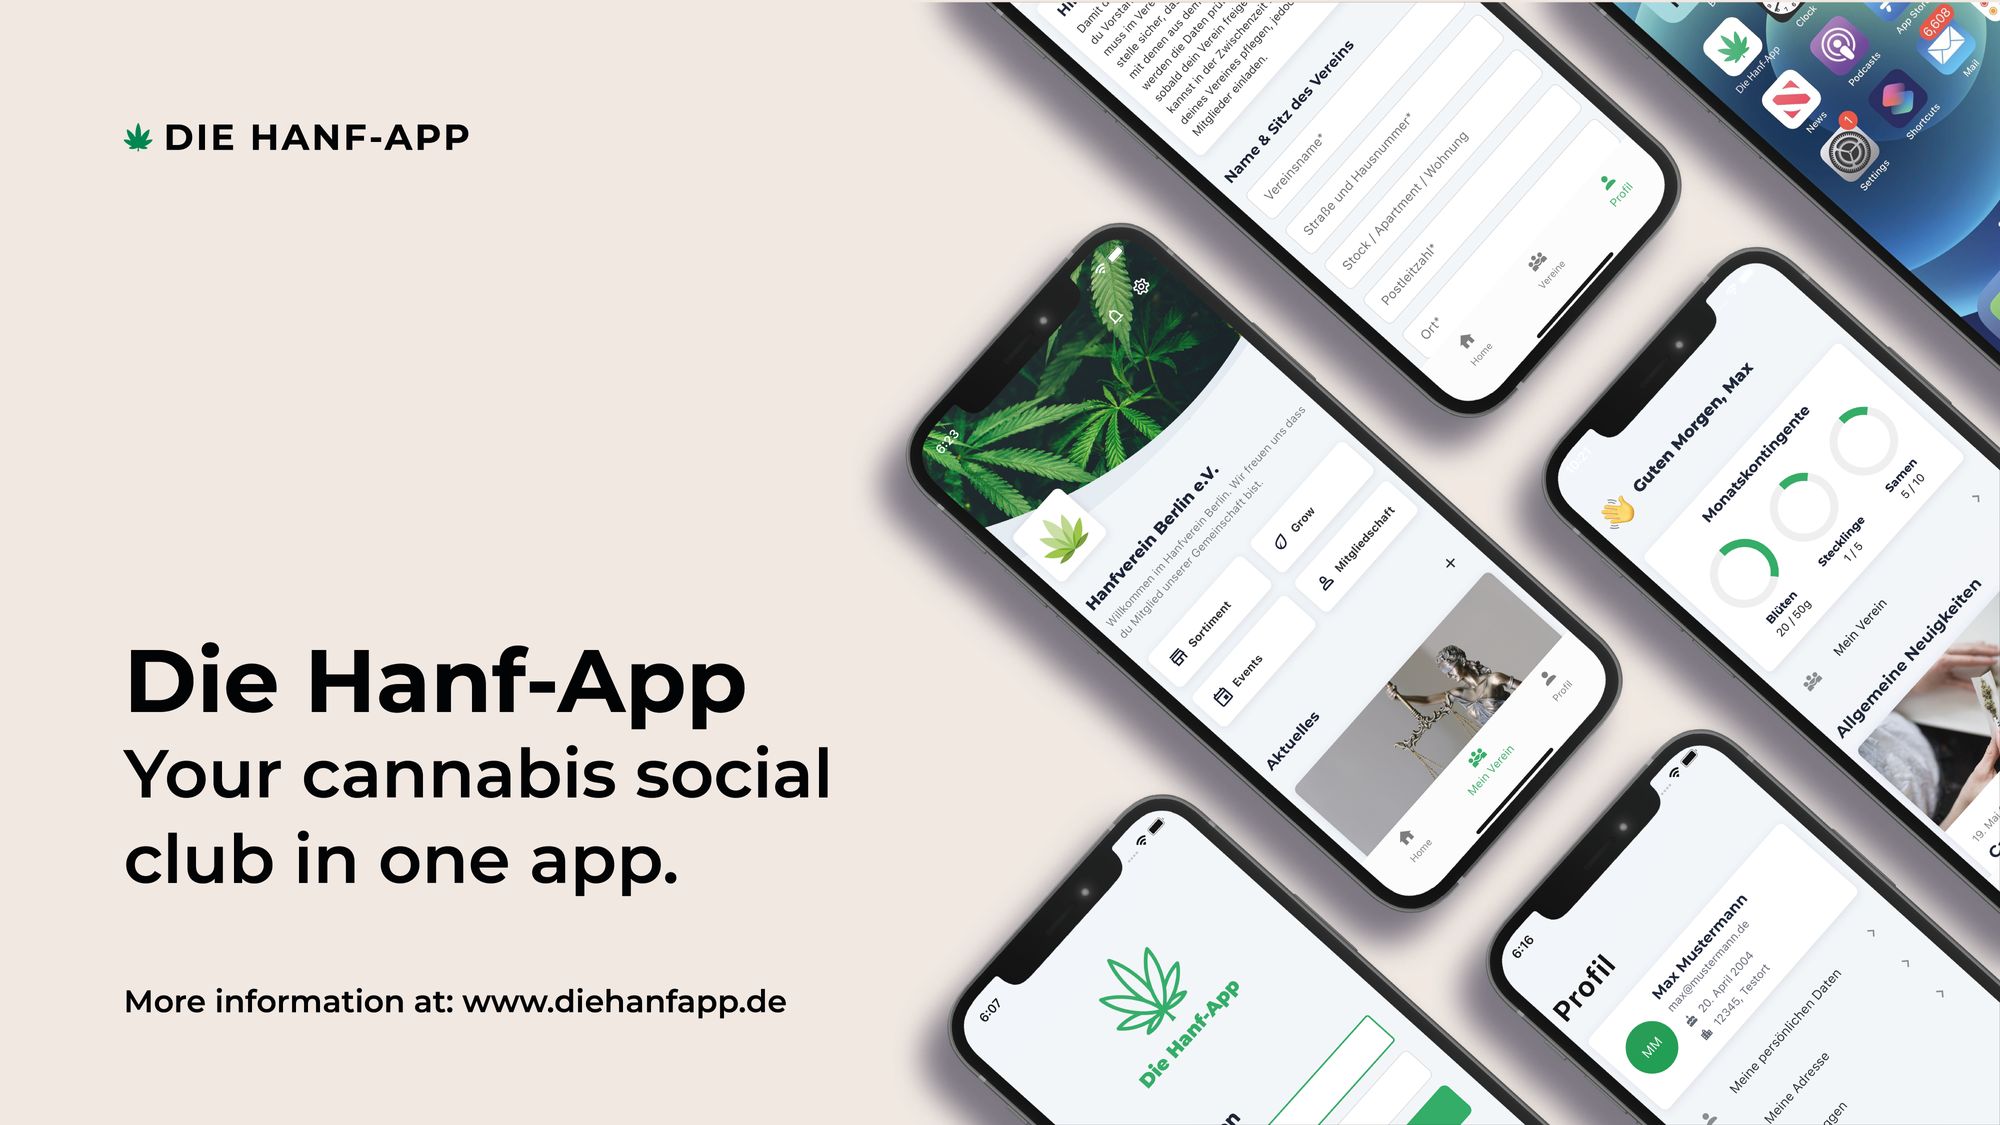 Pioneering the Future of Cannabis in Germany: Introducing Die Hanf-App GmbH and Celebrating a Landmark Investment